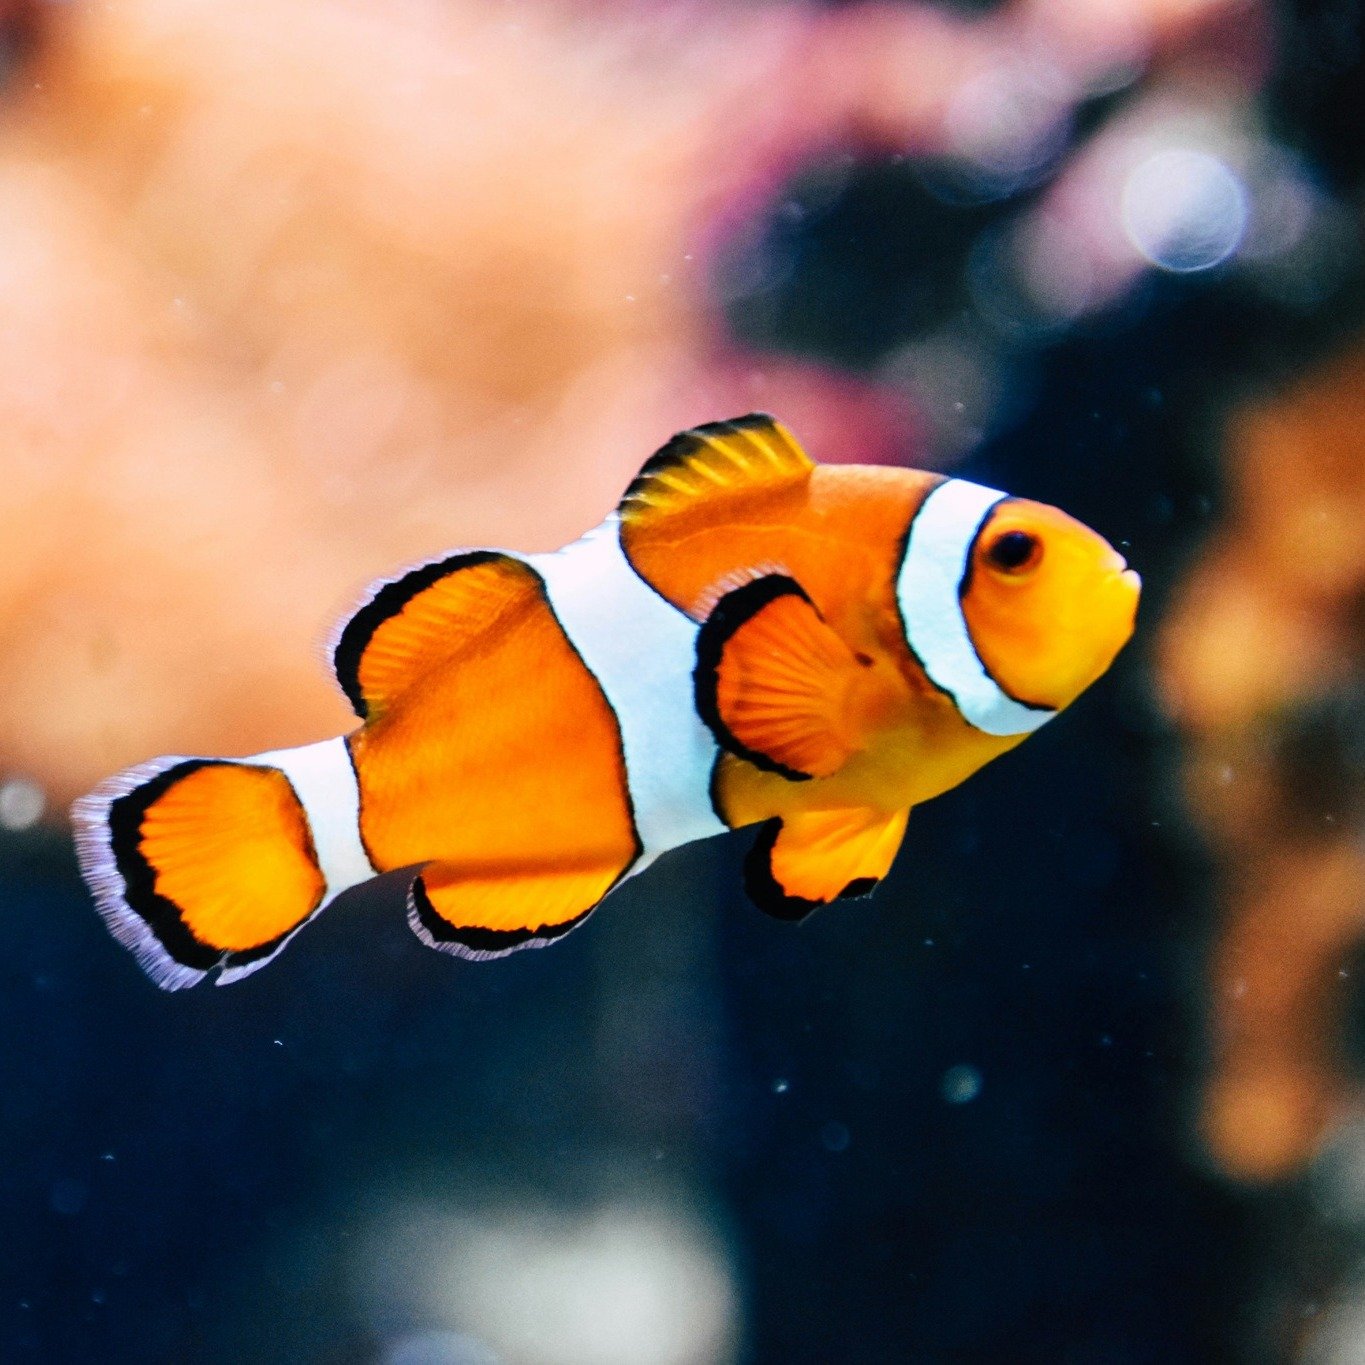 Davidson-Davie Community College is hosting their Spring Open Aquarium on Friday, April 19th from 4:00PM to 7:00PM. At DCCC, it will be located in the Davidson Campus, Sinclair Building. FREE EVENT!
.
.
.
#thomasville #thomasvillenctourism #thomasvil